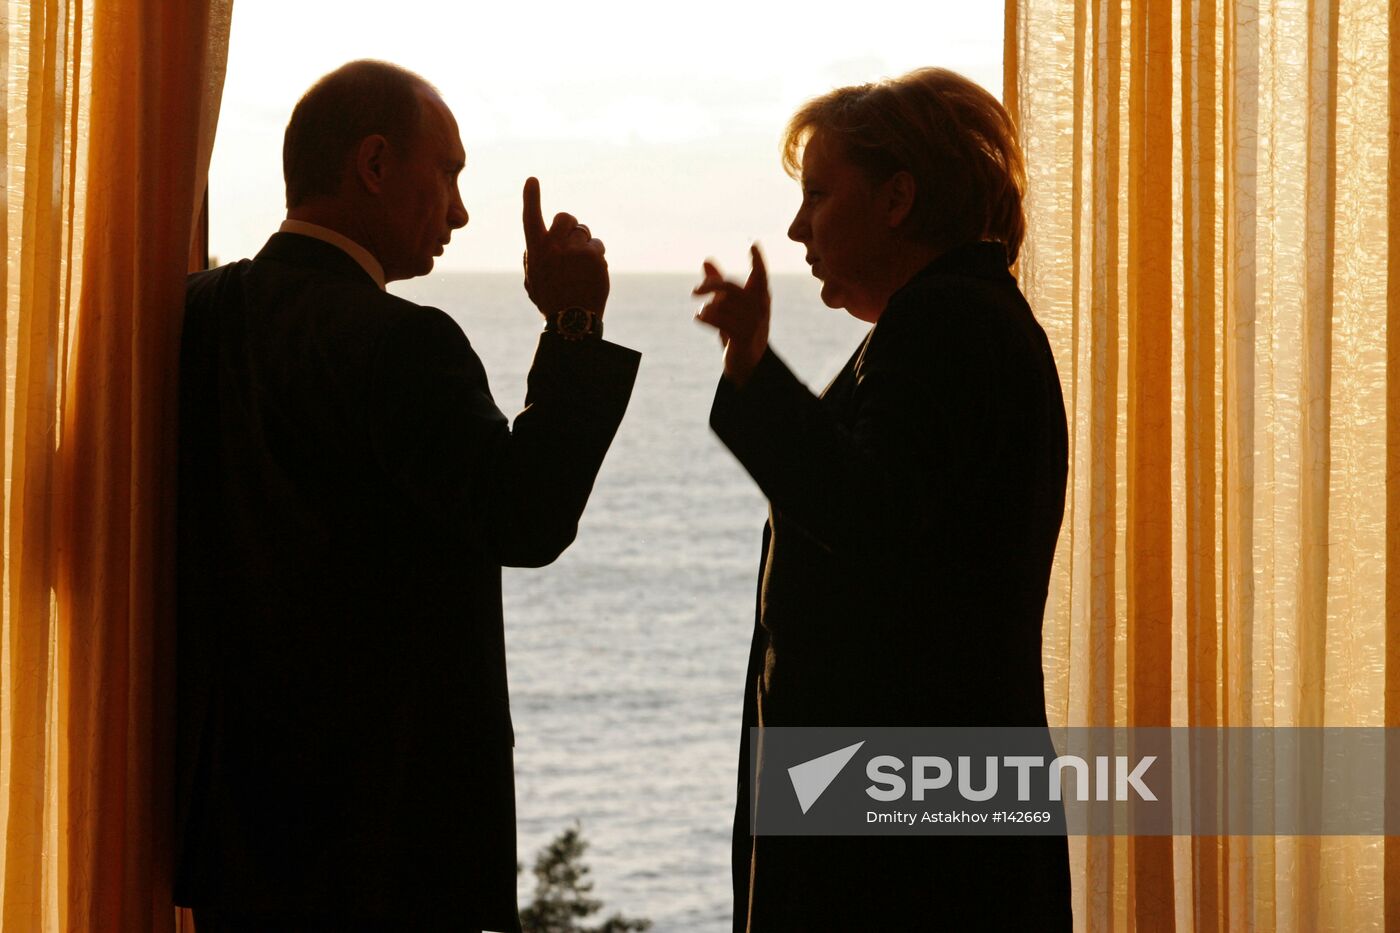 The German chancellor and the Russian president meeting in Sochi